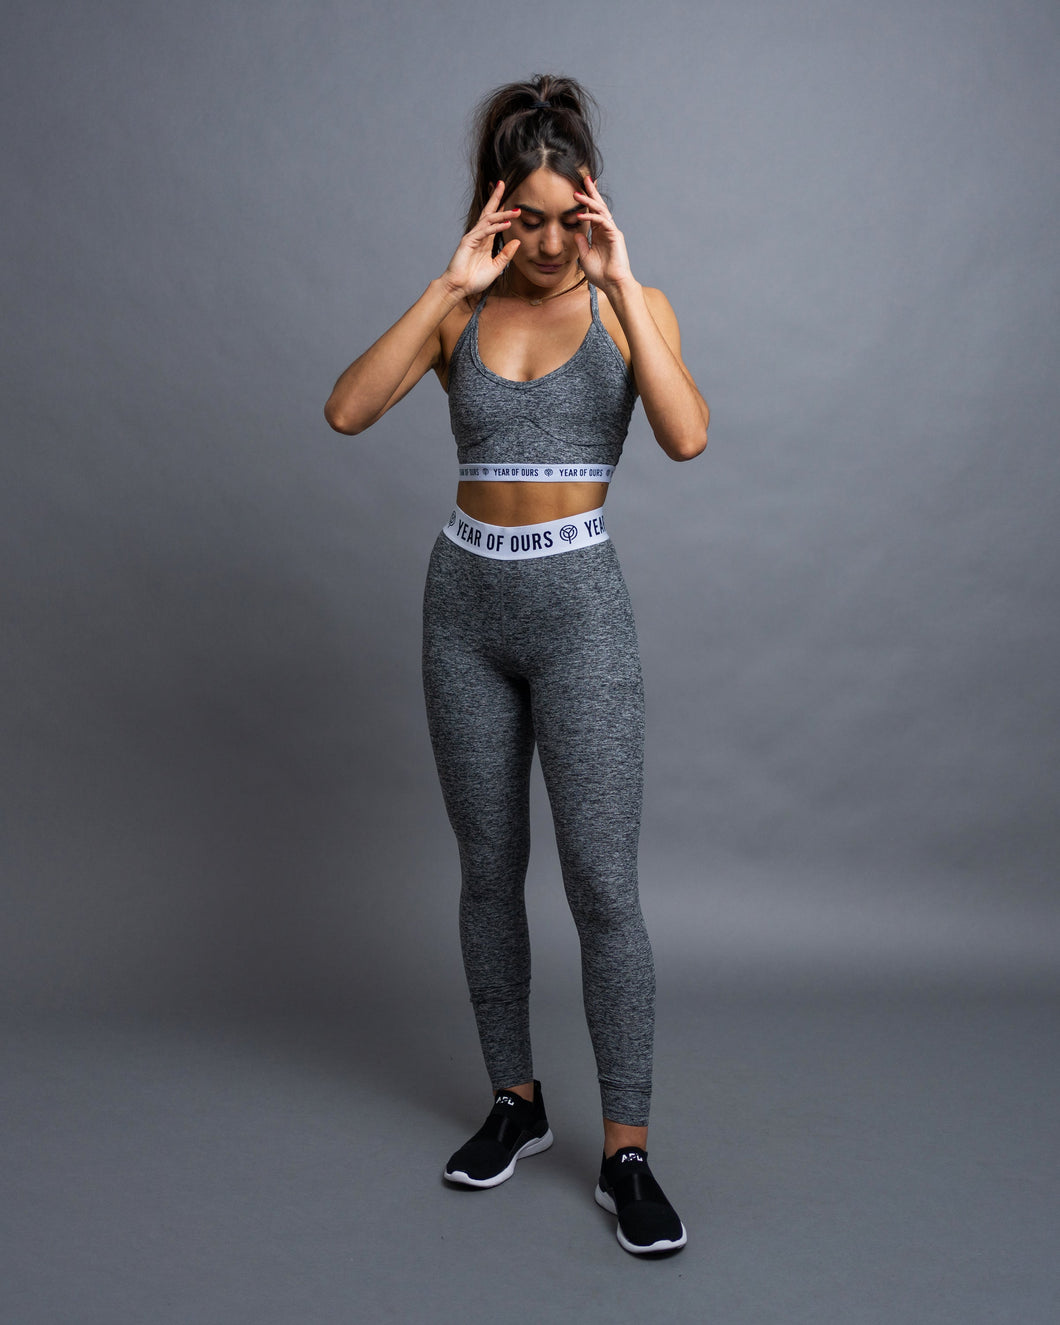 Year Of Ours Logo Bralette - Heather Grey